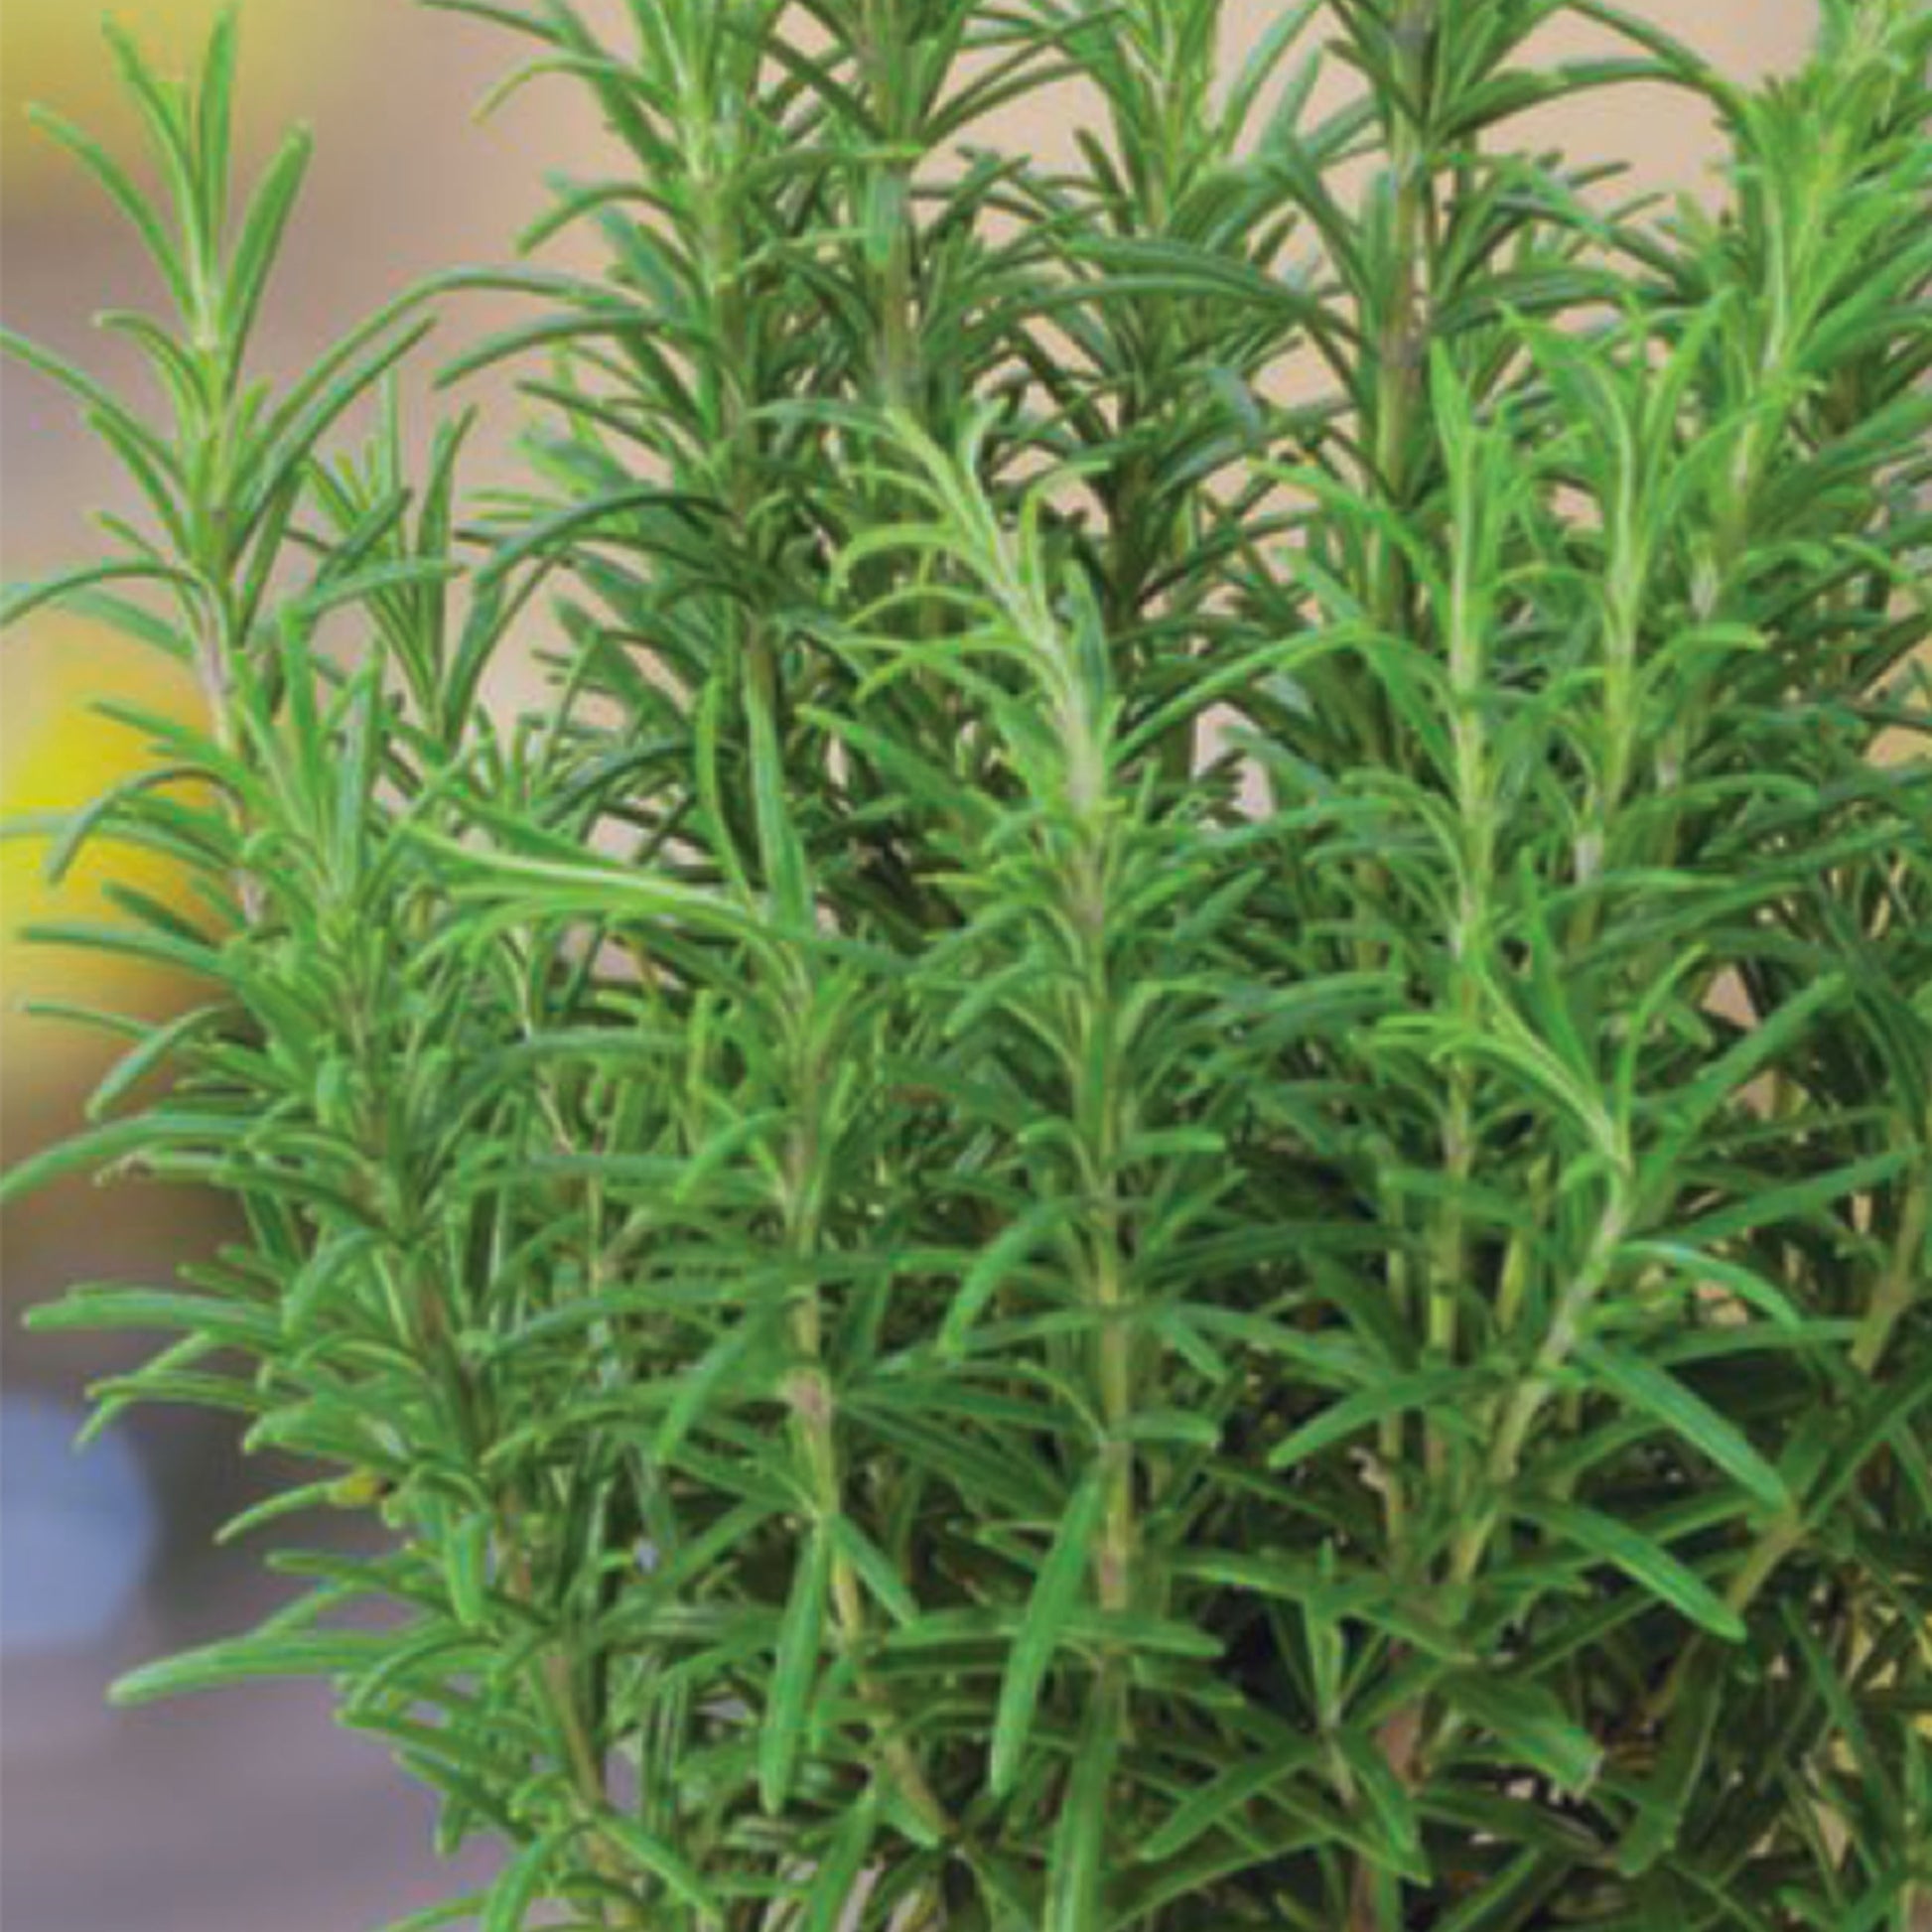 Mature young rosemary plant_closeup of healthy green rosemary sprigs.